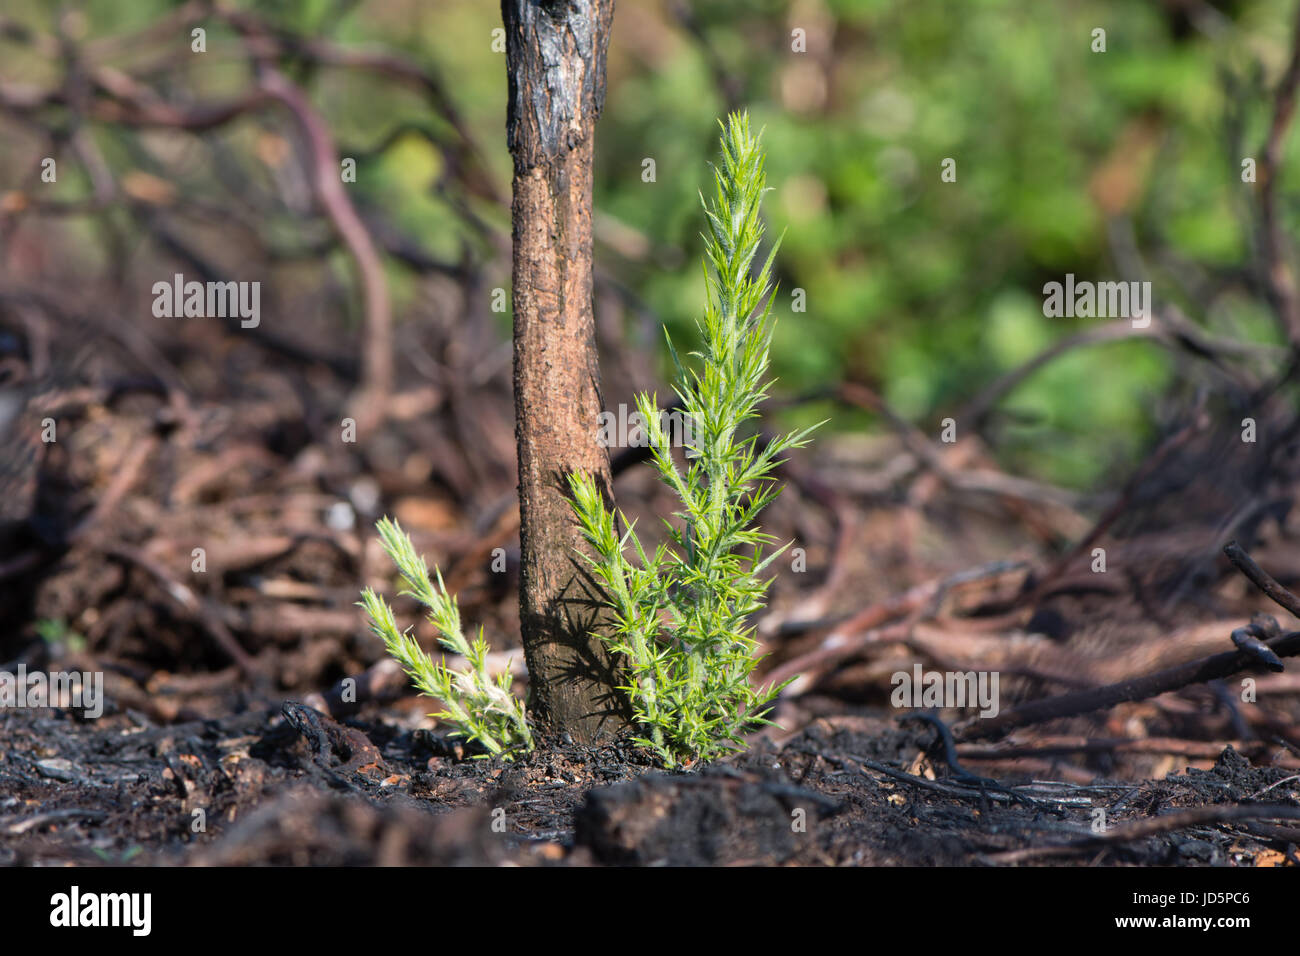 Gorse (Ulex europaeus) regrowth shoots after burning. New growth at base of plant after area of heathland burnt to prevent vegetative succession Stock Photo